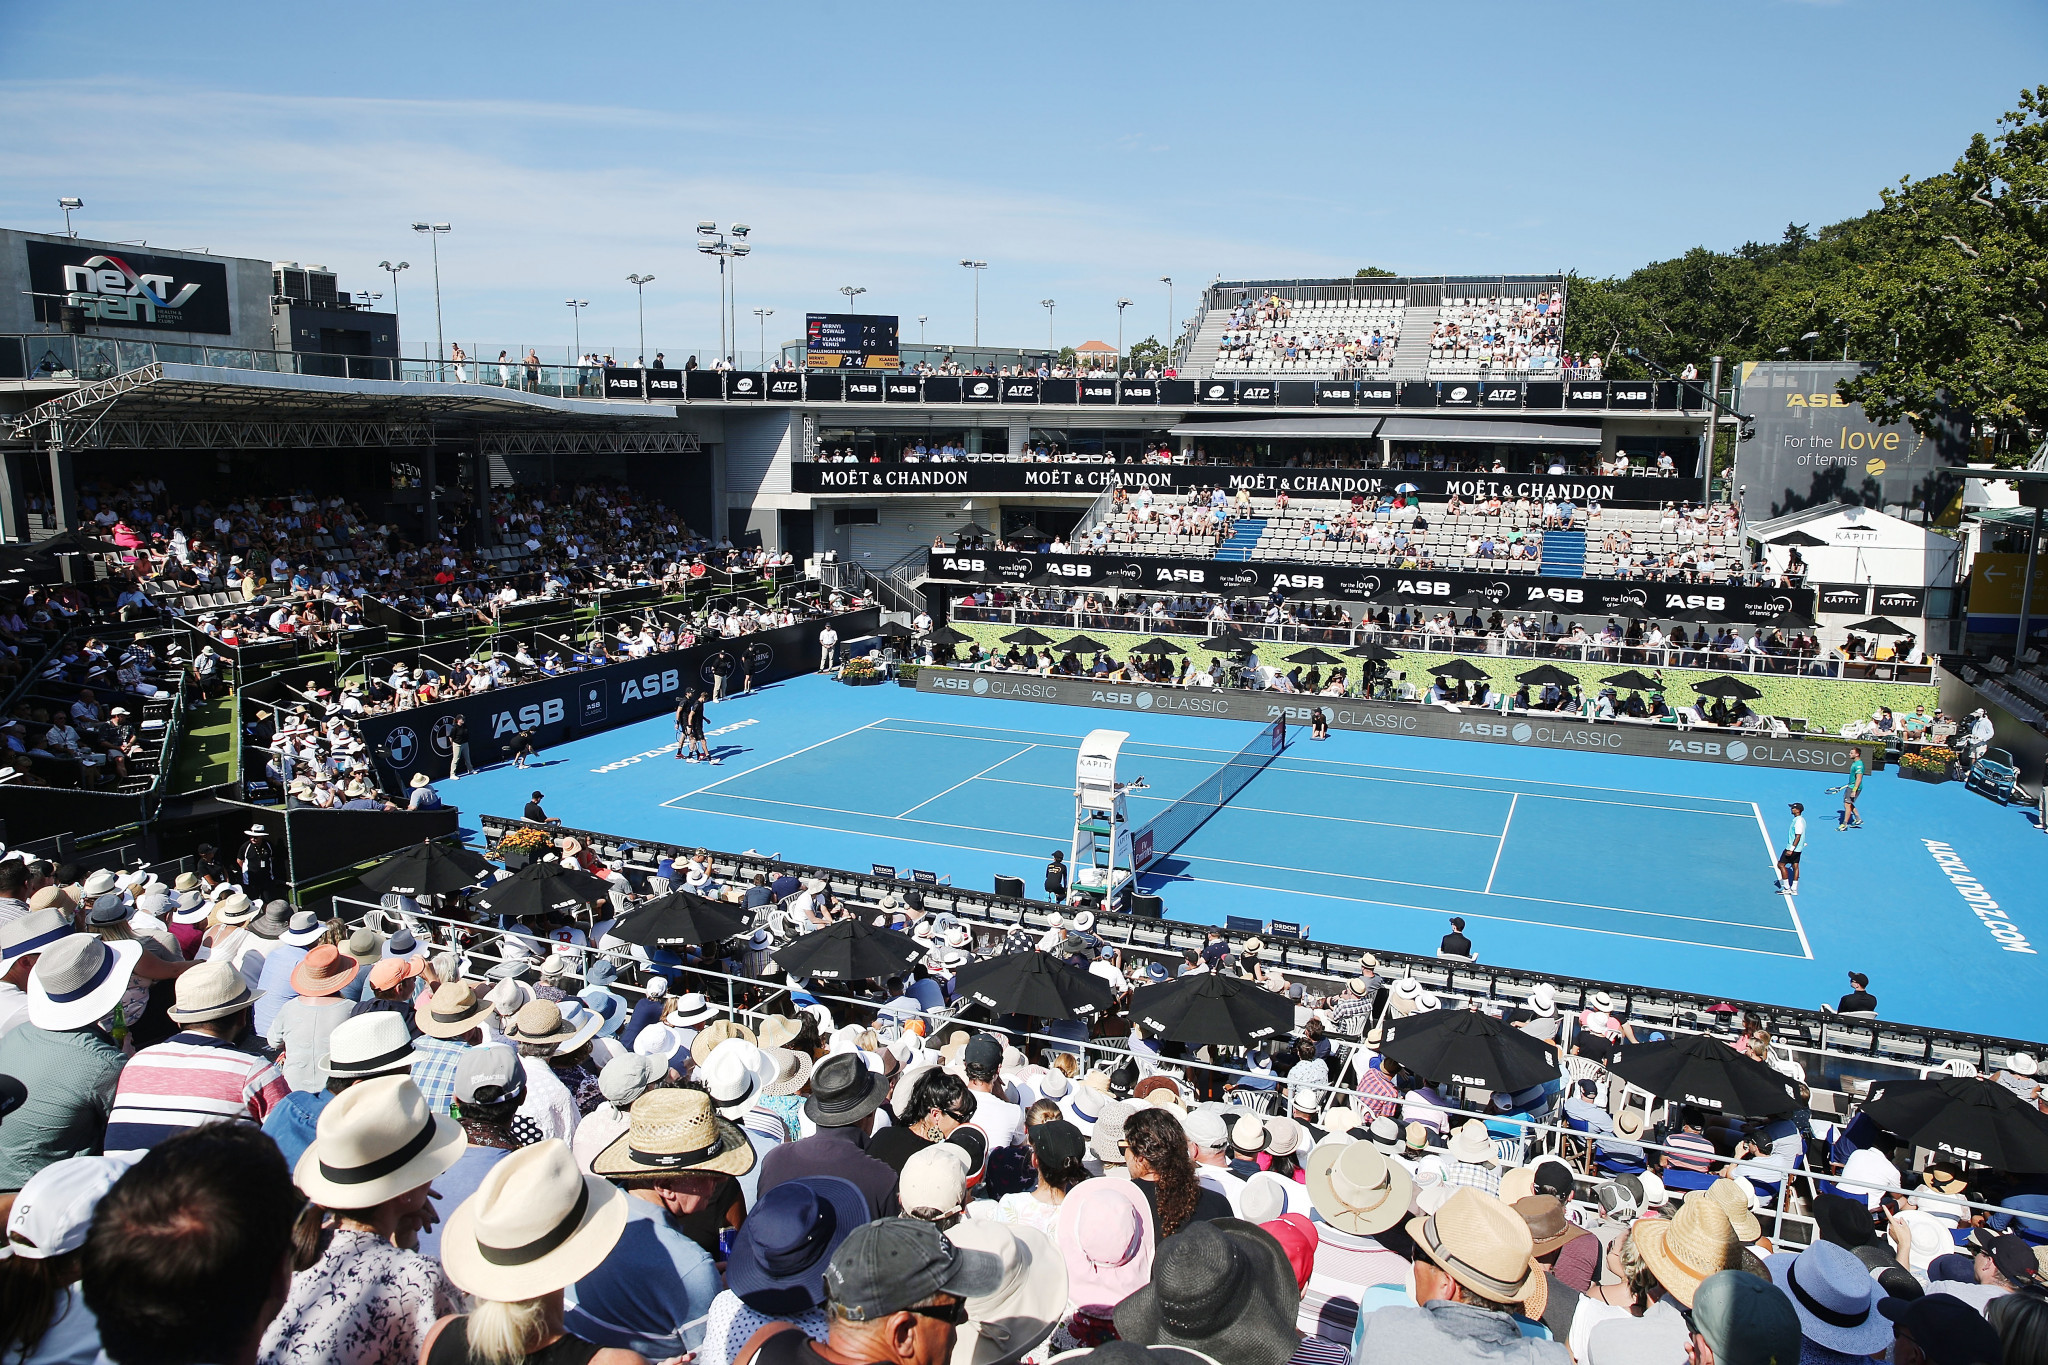 Netball NZ are looking into the possibility of converting the ASB Tennis Centre for the 2023 World Cup ©Getty Images